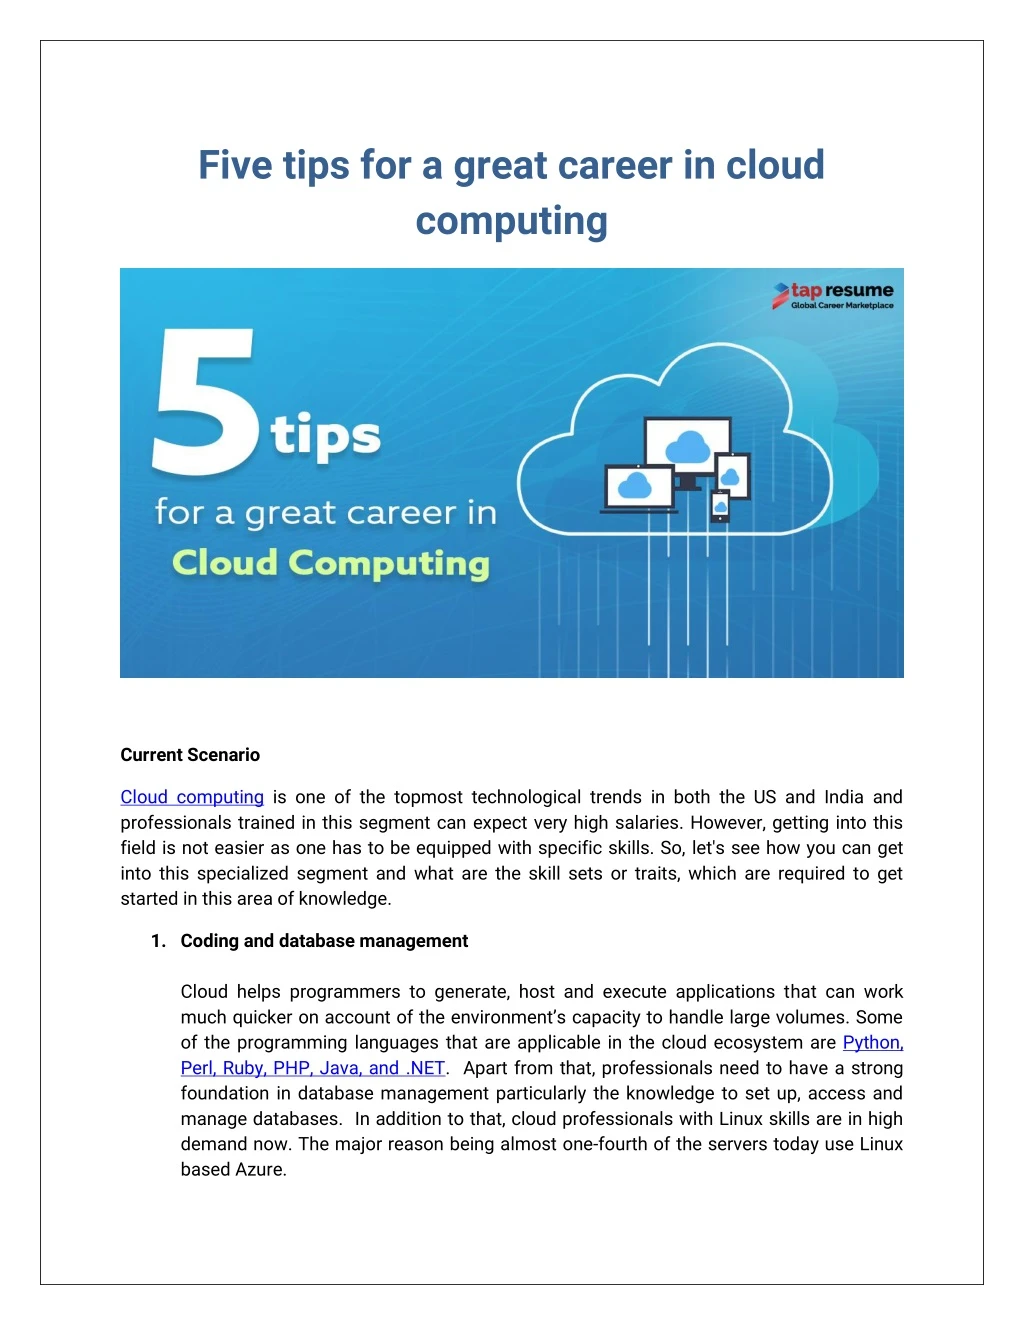 five tips for a great career in cloud computing